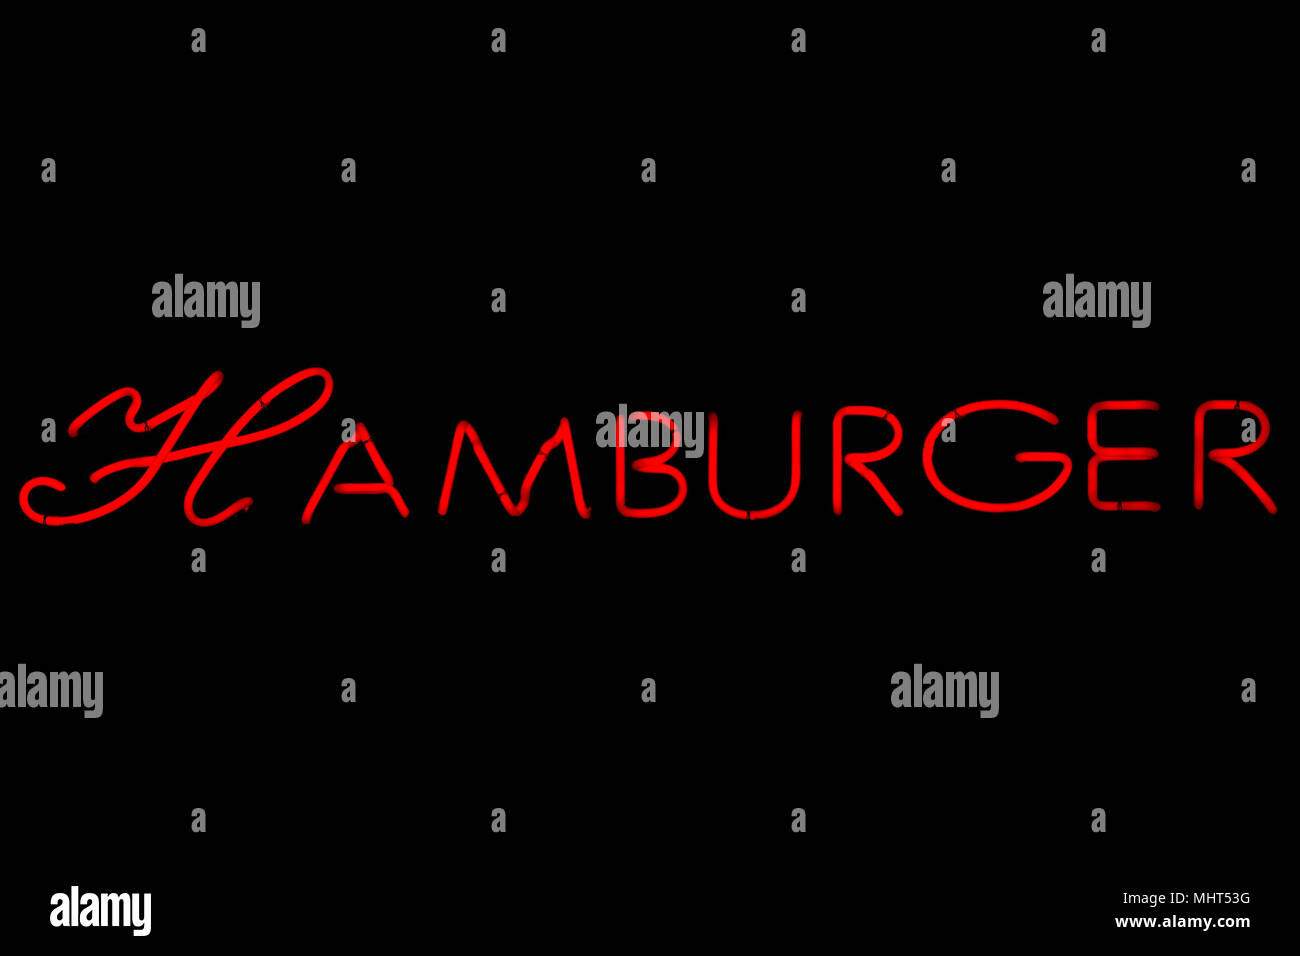 hamburger neon red sign isolated on black background Stock Photo